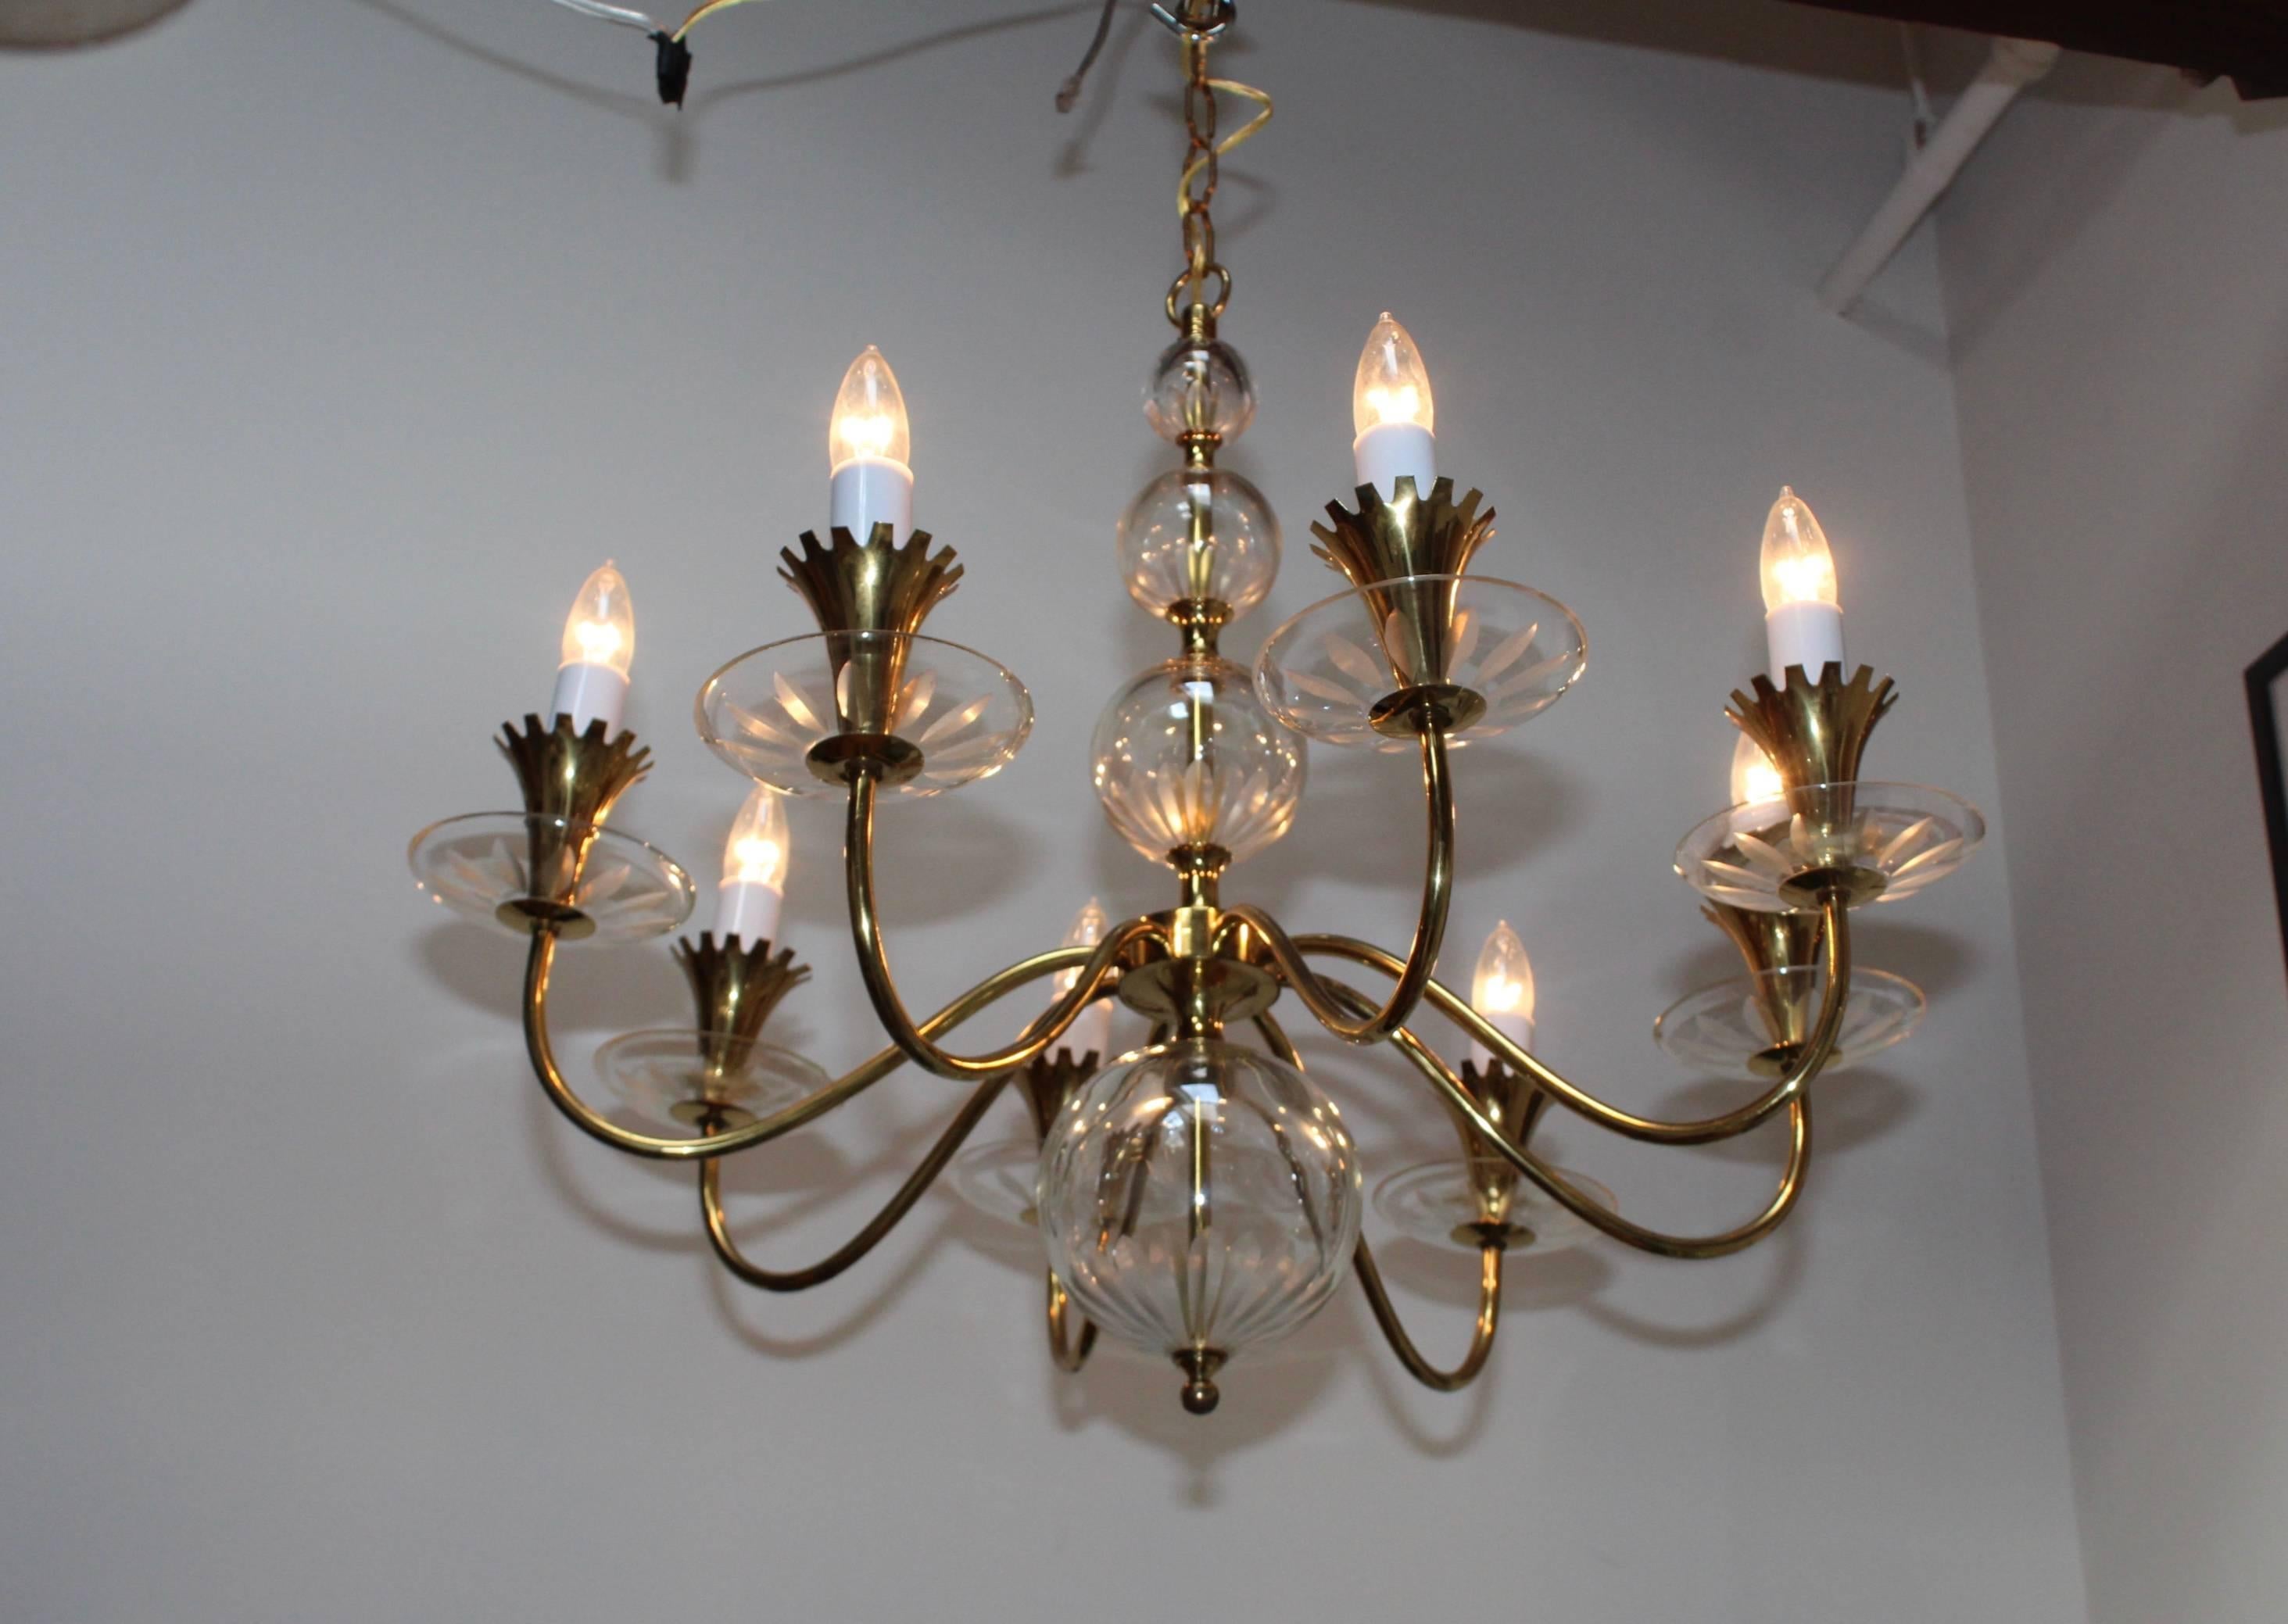 1950s brass with etched glass eight-arm chandelier by Lightolier.